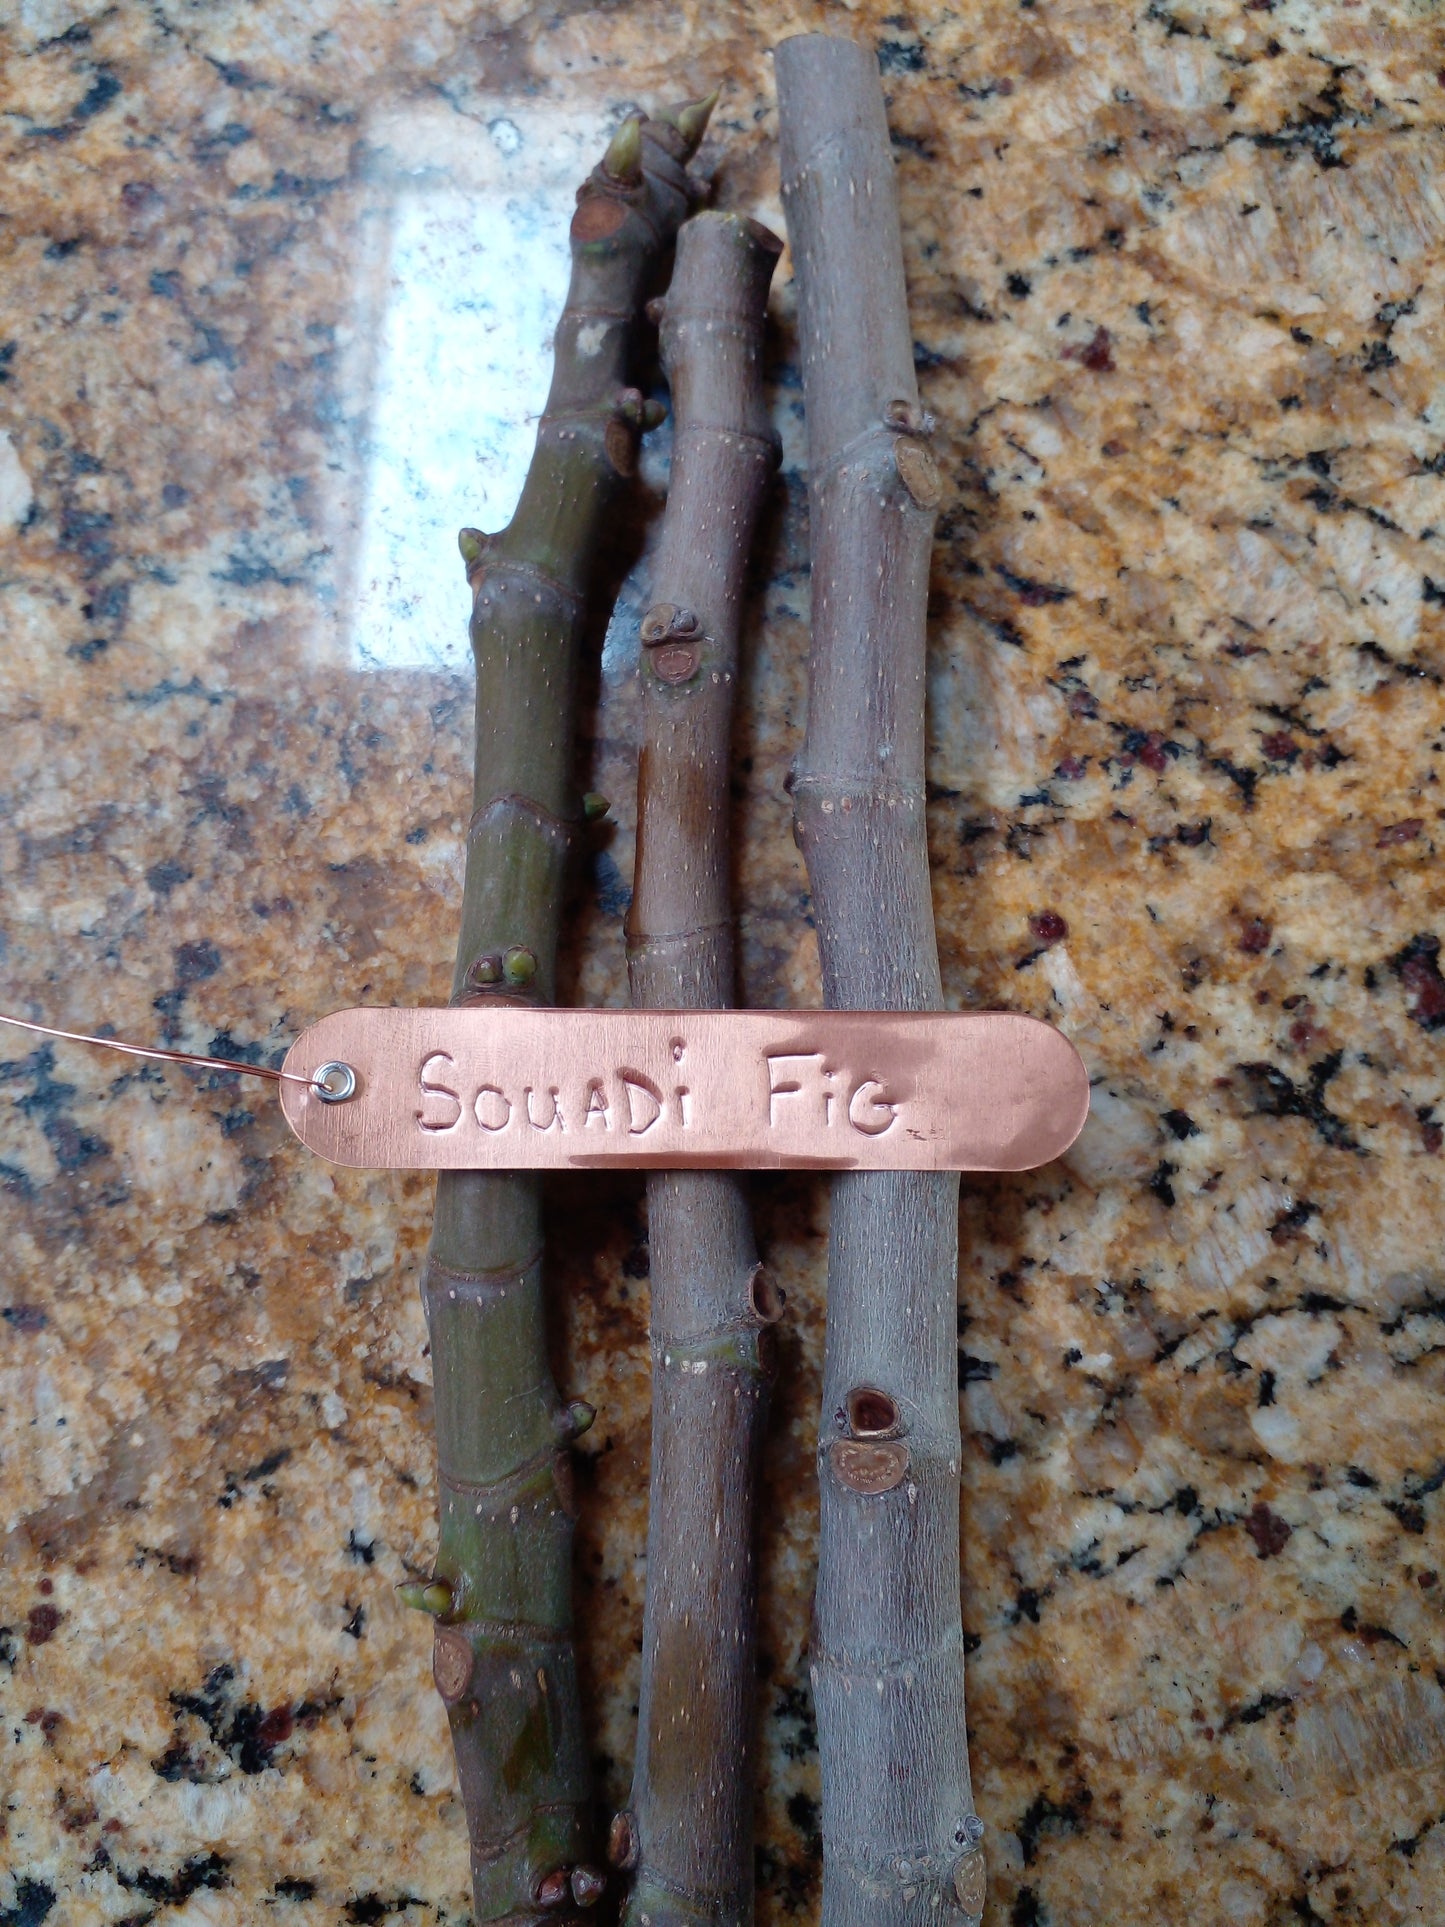 Souadi Fig - 2 Cuttings - Beautiful coloring and Sweet Pleasant Flavor